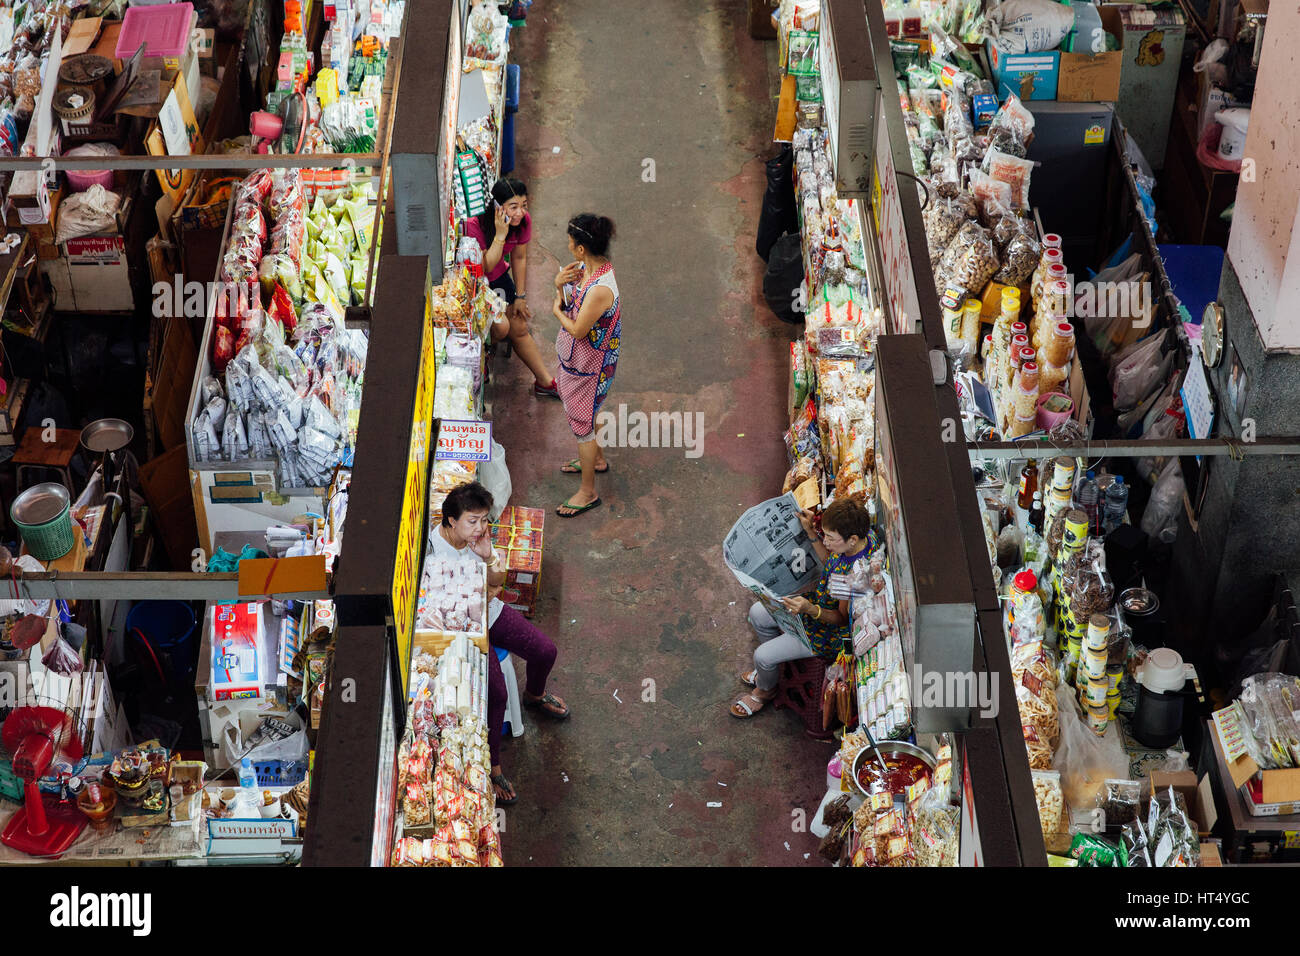 Chiang Mai, Thailand - August 27, 2016:  The group of vendors wait for customers at the Warorot market on August 27, 2016 in Chiang Mai, Thailand. Stock Photo